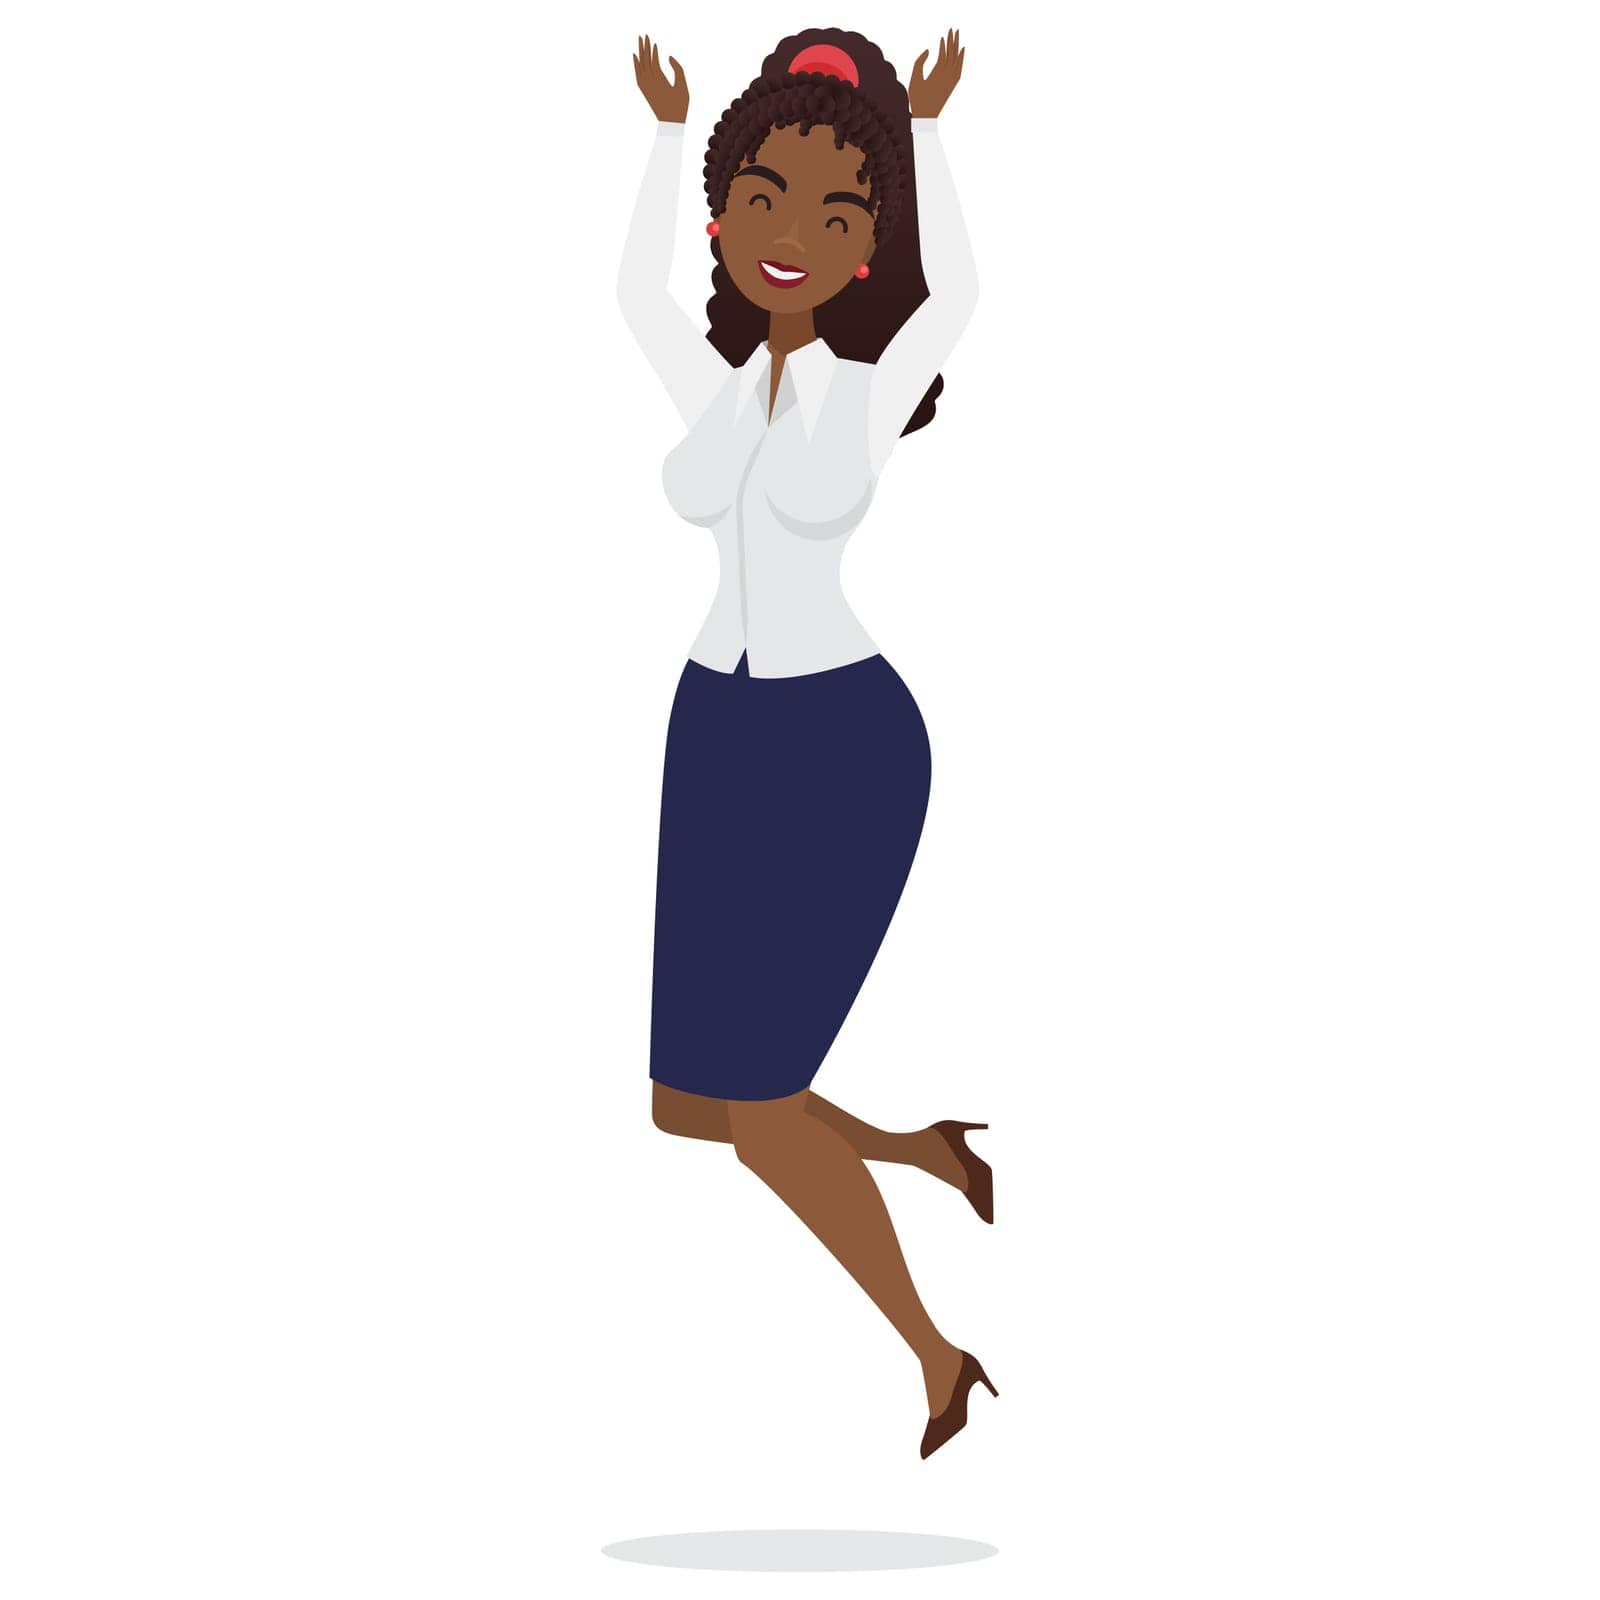 Jumping excited black businesswoman. Successful african office manager cartoon vector illustration